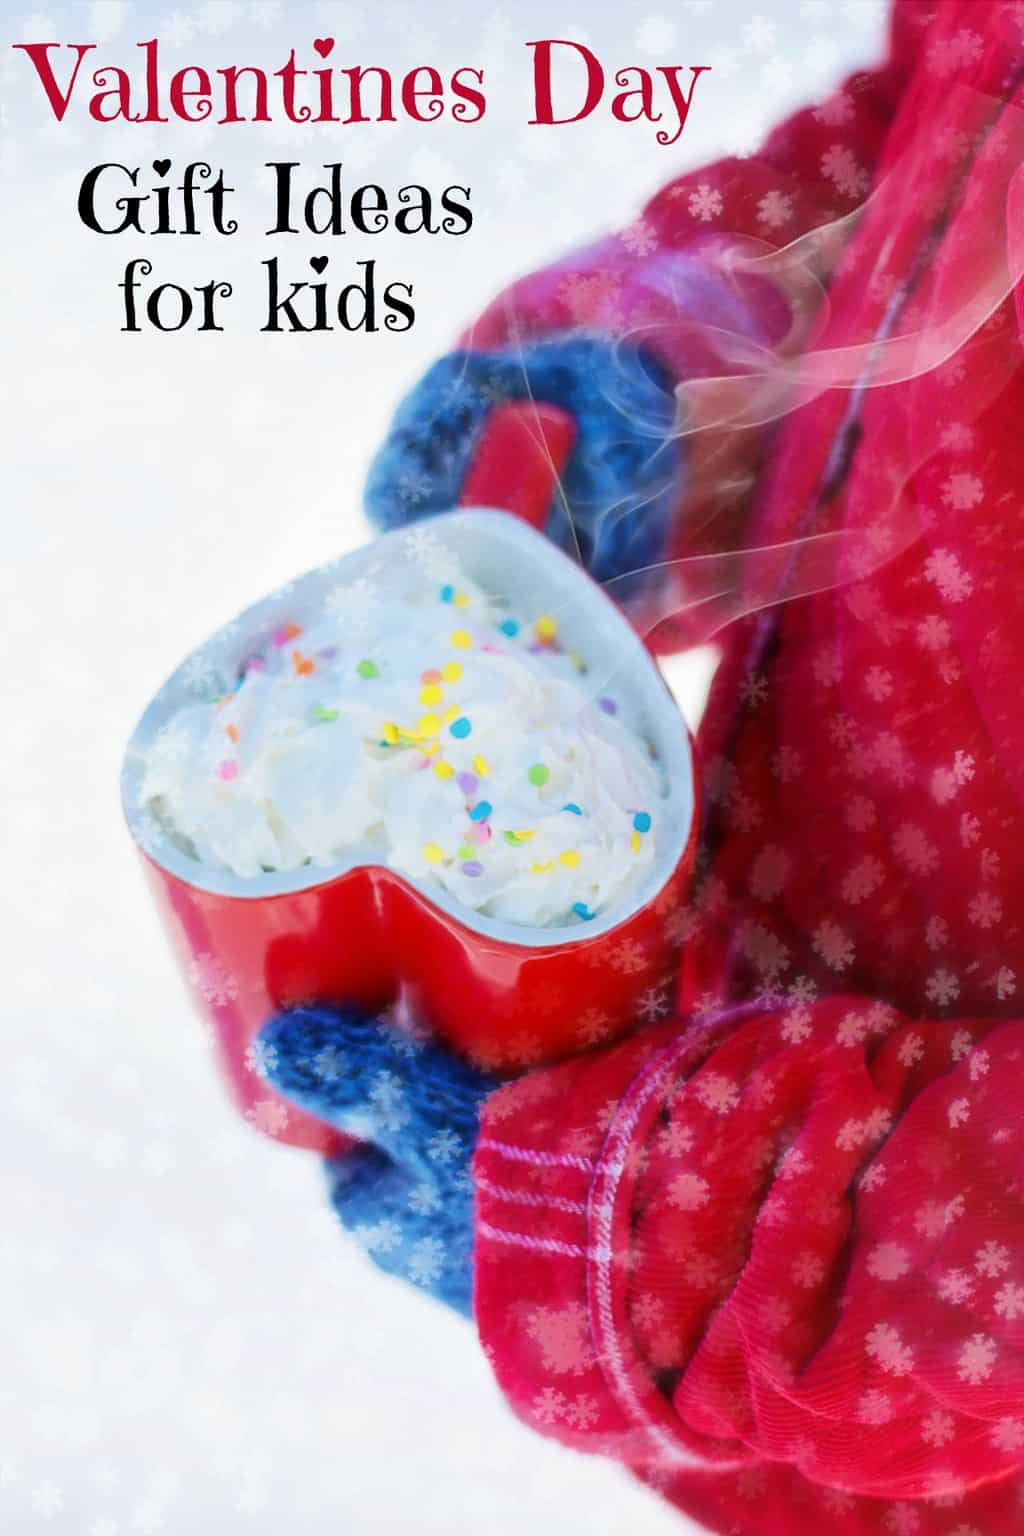 Gift Ideas For Kids For Valentines Day
 Valentines Day Gift Ideas For Kids Suburbia Unwrapped